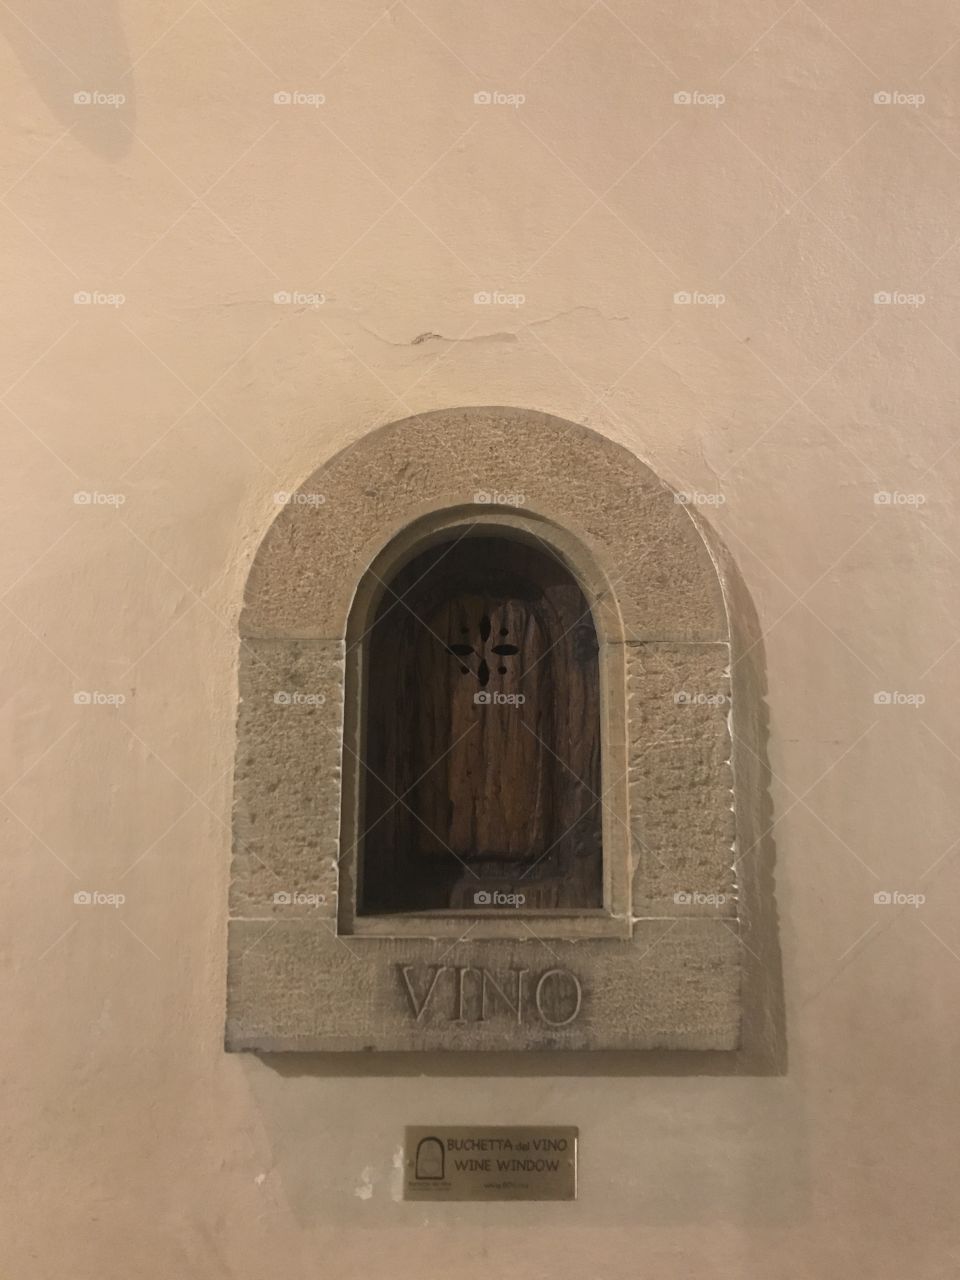 Cute little wine box inside a wall of a restaurant in Florence, Italy.